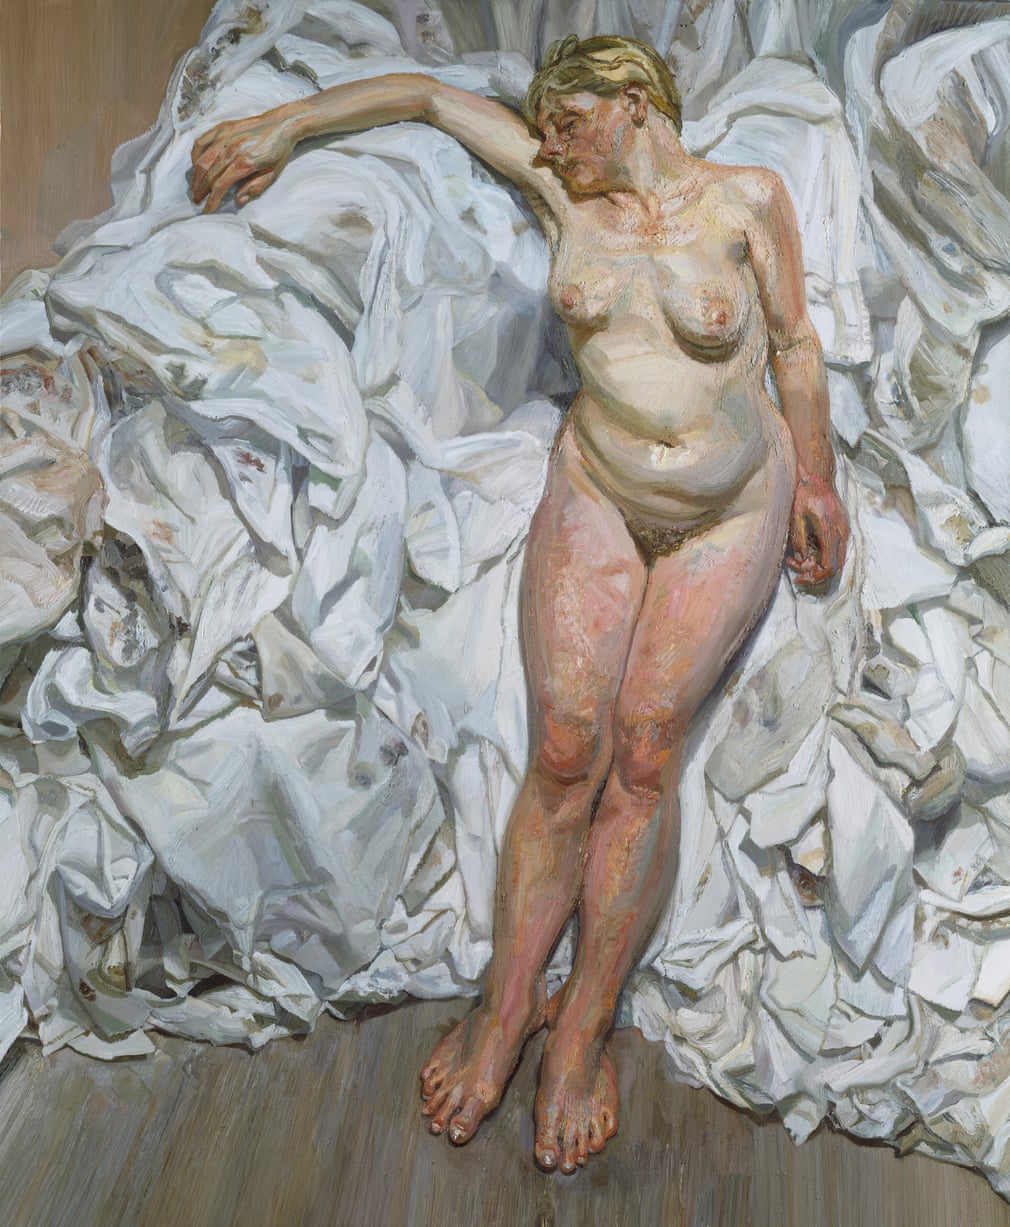 Standing by the Rags Lucian Michael Freud